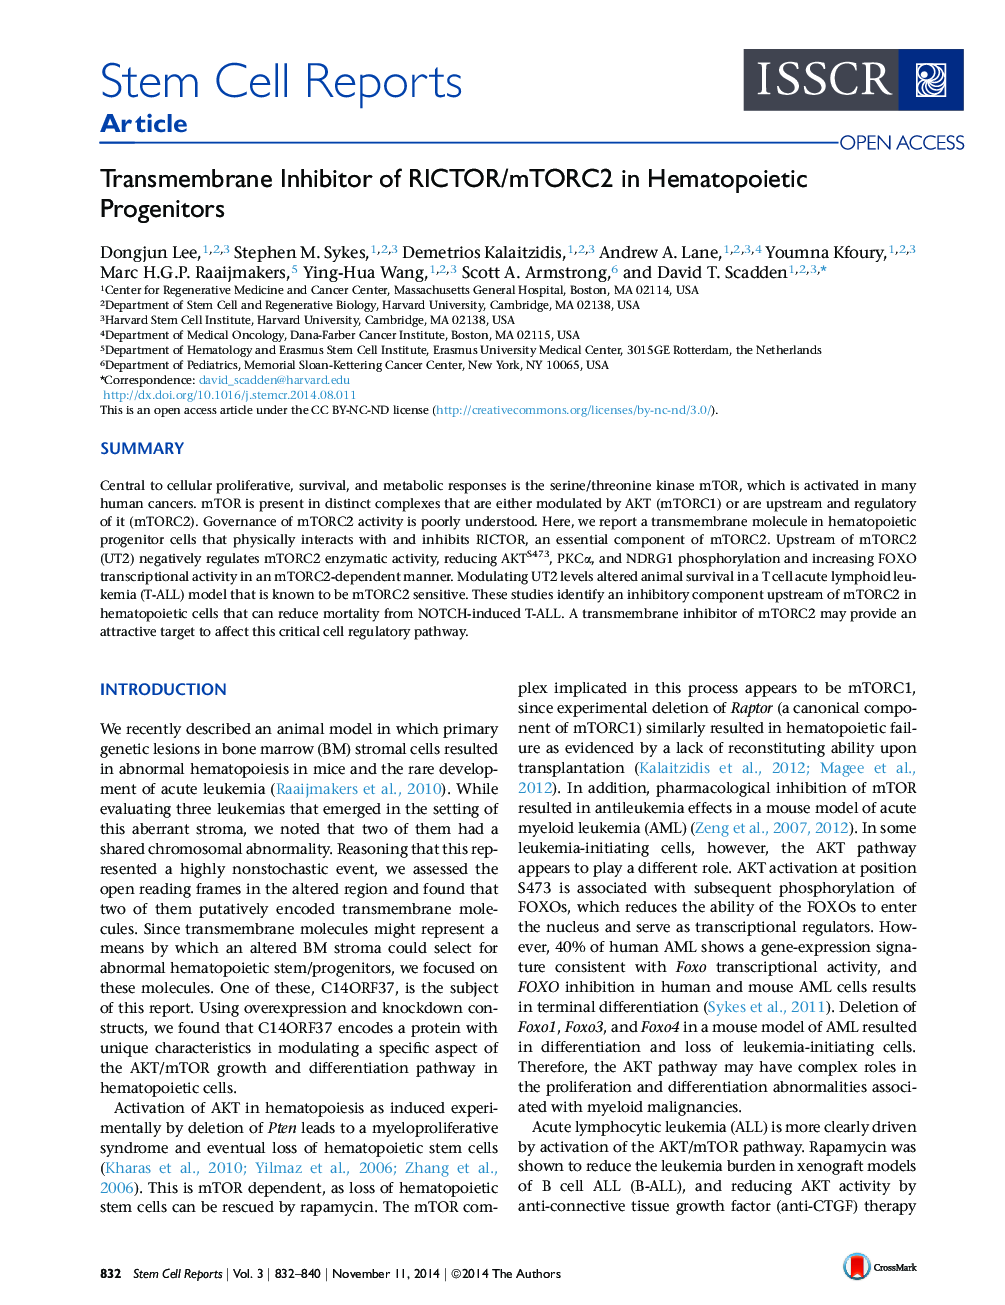 Transmembrane Inhibitor of RICTOR/mTORC2 in Hematopoietic Progenitors 